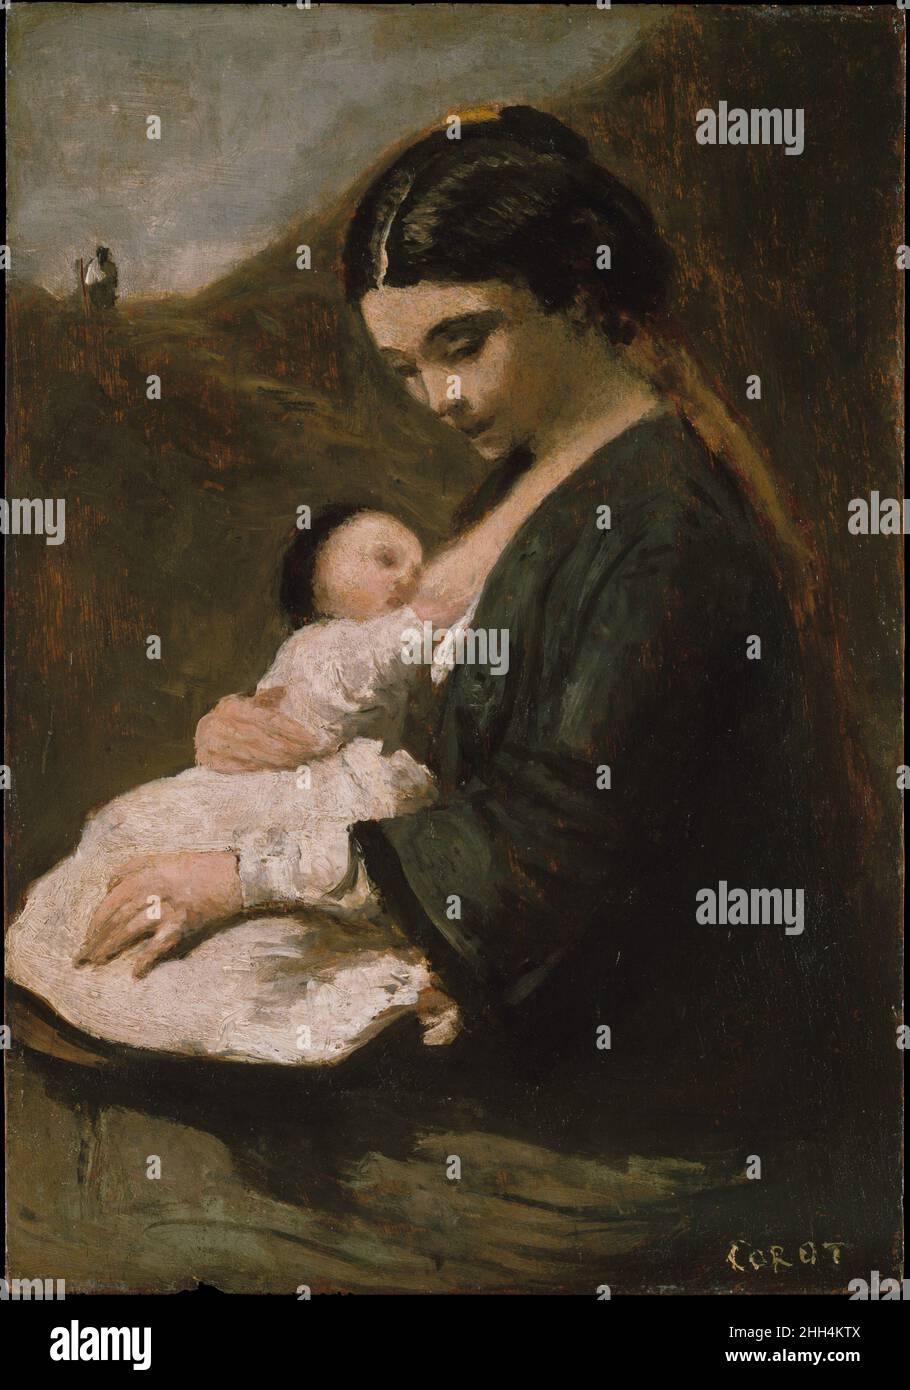 Mother and Child probably 1860s Camille Corot French This small panel, probably done in the 1860s, was evidently well known and admired in Corot's circle of friends. Both Constant Dutilleux (1807–1865) and Charles Desavary (1837–1885), two painters living in Arras, a town in northern France that Corot often visited, copied the painting. About 1873 Corot gave it to his patron Cléophas, who had provided him with a supplementary studio where he could work undisturbed.. Mother and Child  435977 Stock Photo